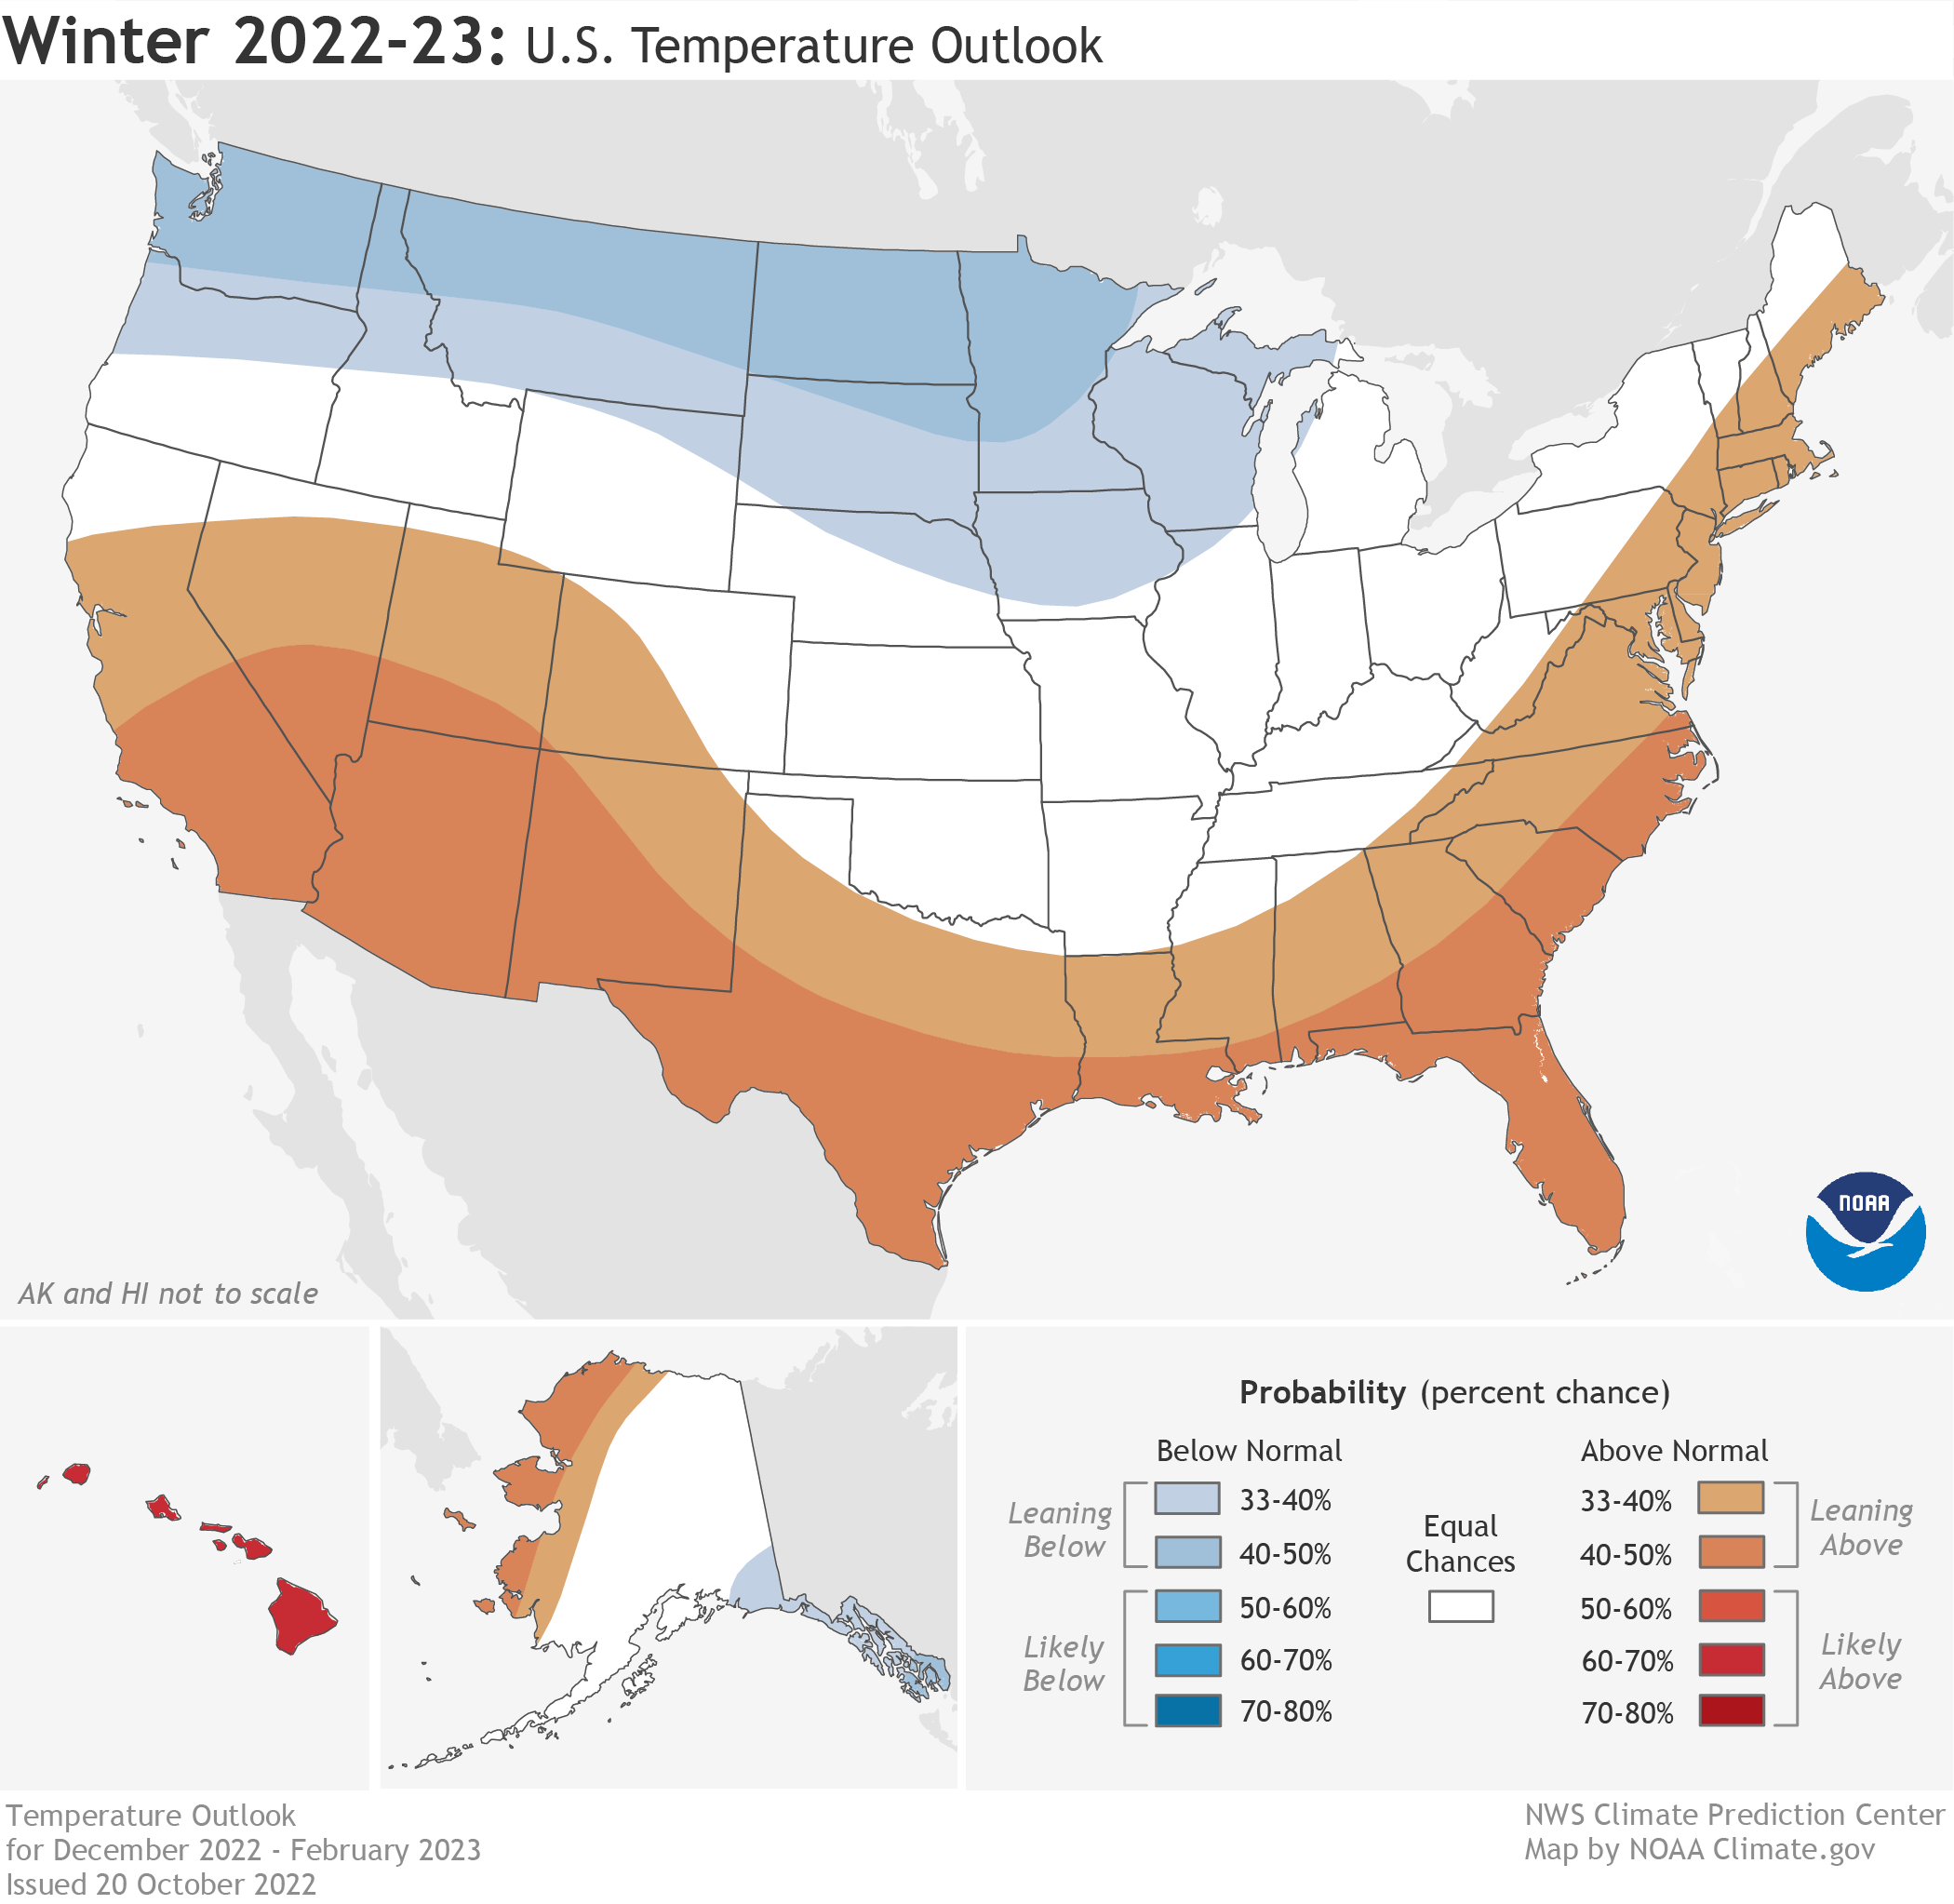 Map showing the U.S. Winter Outlook 2022-2023 map for temperature shows the greatest chances for warmer-than-average conditions in western Alaska, and the Central Great Basin and Southwest extending through the Southern Plains. Below normal temperatures are favored from the Pacific Northwest eastward to the western Great Lakes and the Alaska Panhandle.